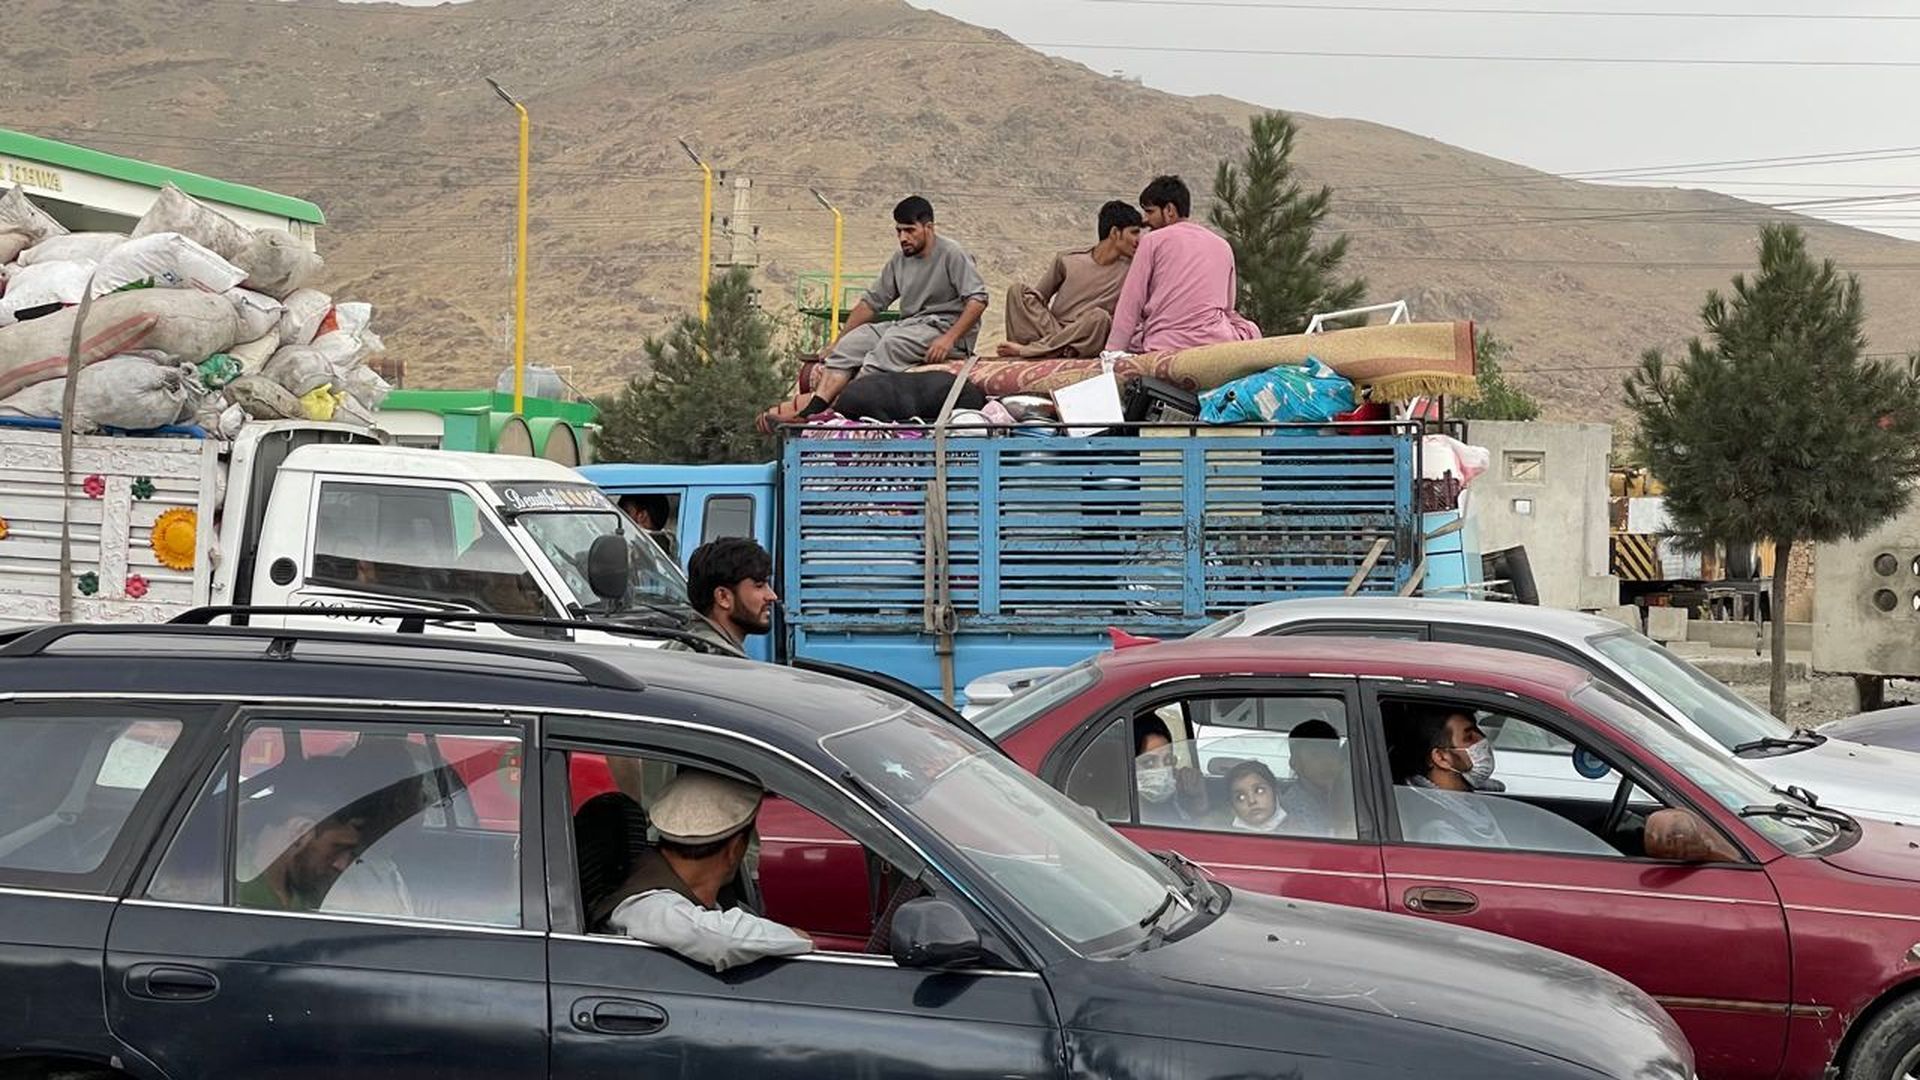 Afghans continue to wait around the Hamid Karzai International Airport as they try to leave the Afghan capital of Kabul, Afghanistan on August 21.